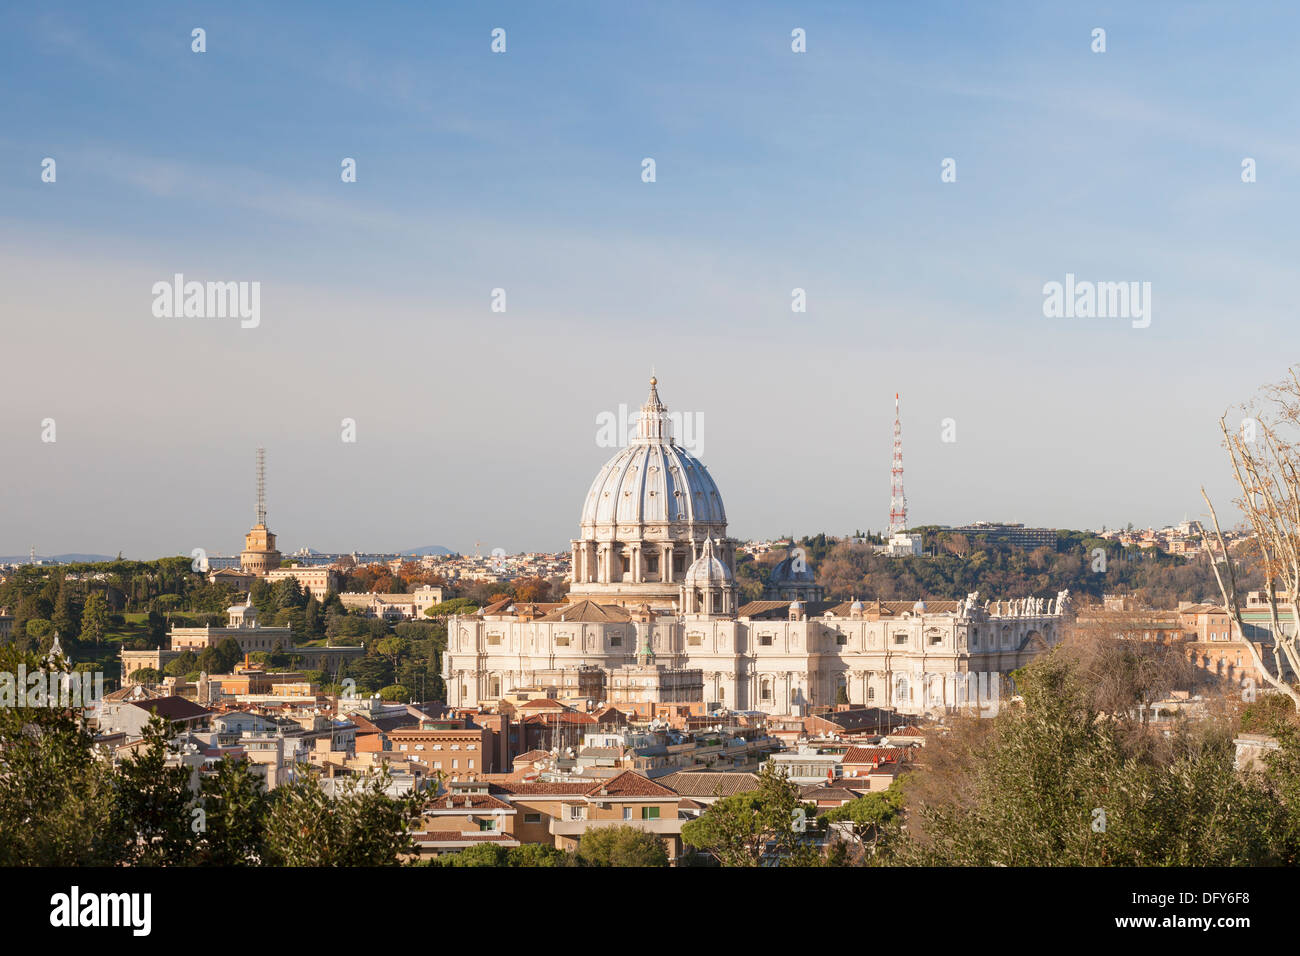 Saint Peter's basilica viewed from Gianicolo, the Janiculum hill, Rome, Italy Stock Photo